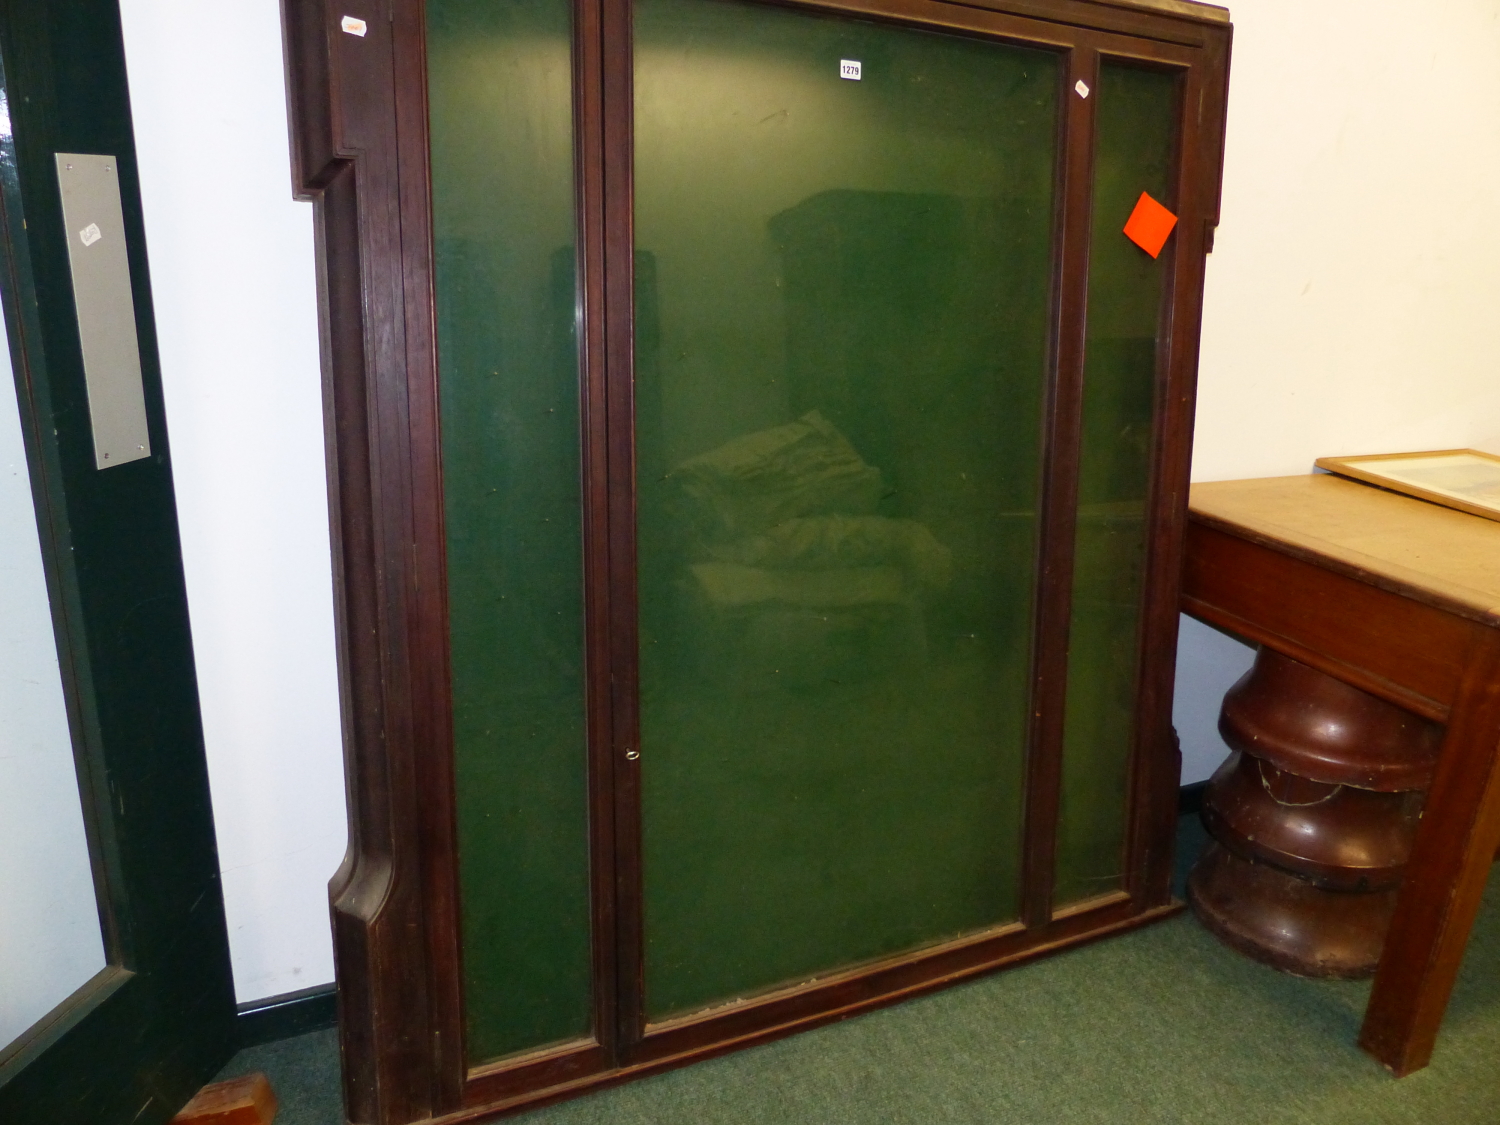 A LATE VICTORIAN MAHOGANY FRAMED GLAZED ROSETTE CABINET OR NOTICE BOARD WITH LOCKING CENTRAL DOOR. - Image 4 of 4